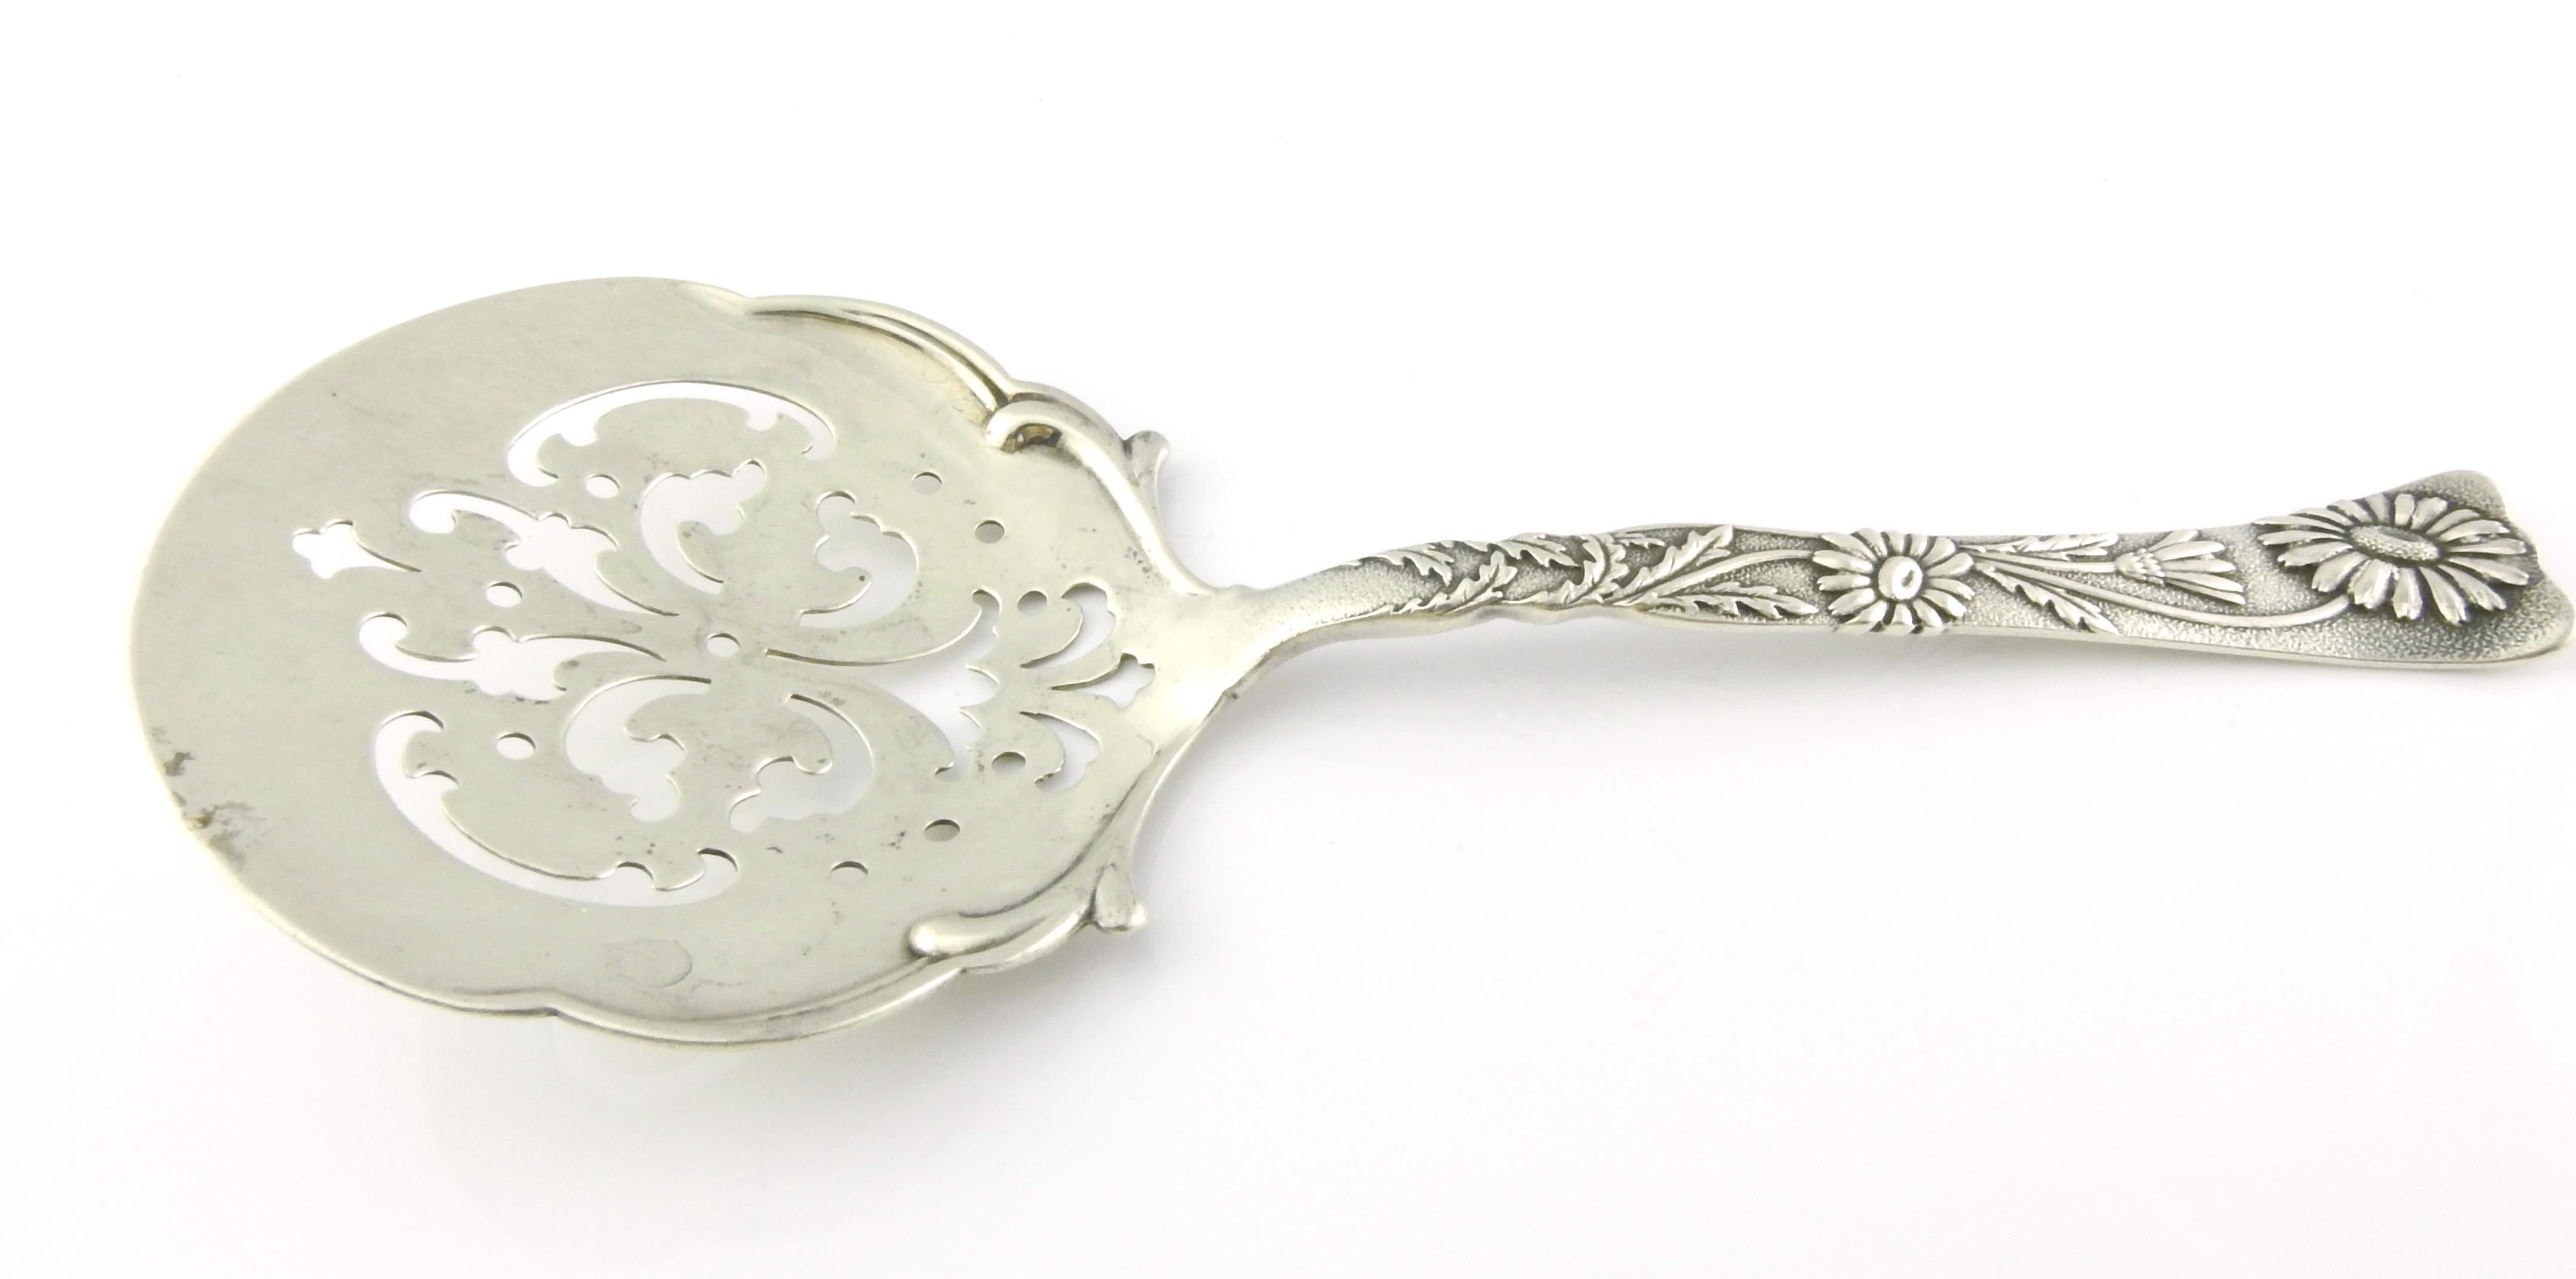 Tiffany & Co. Sterling silver 1872 vine pattern tomato server with daisies

Antique Tiffany & Co. Sterling silver pierced tomato server in the 1872 vine pattern with daisy motif. It is a beautiful piece to add to your collection!

Measurement: